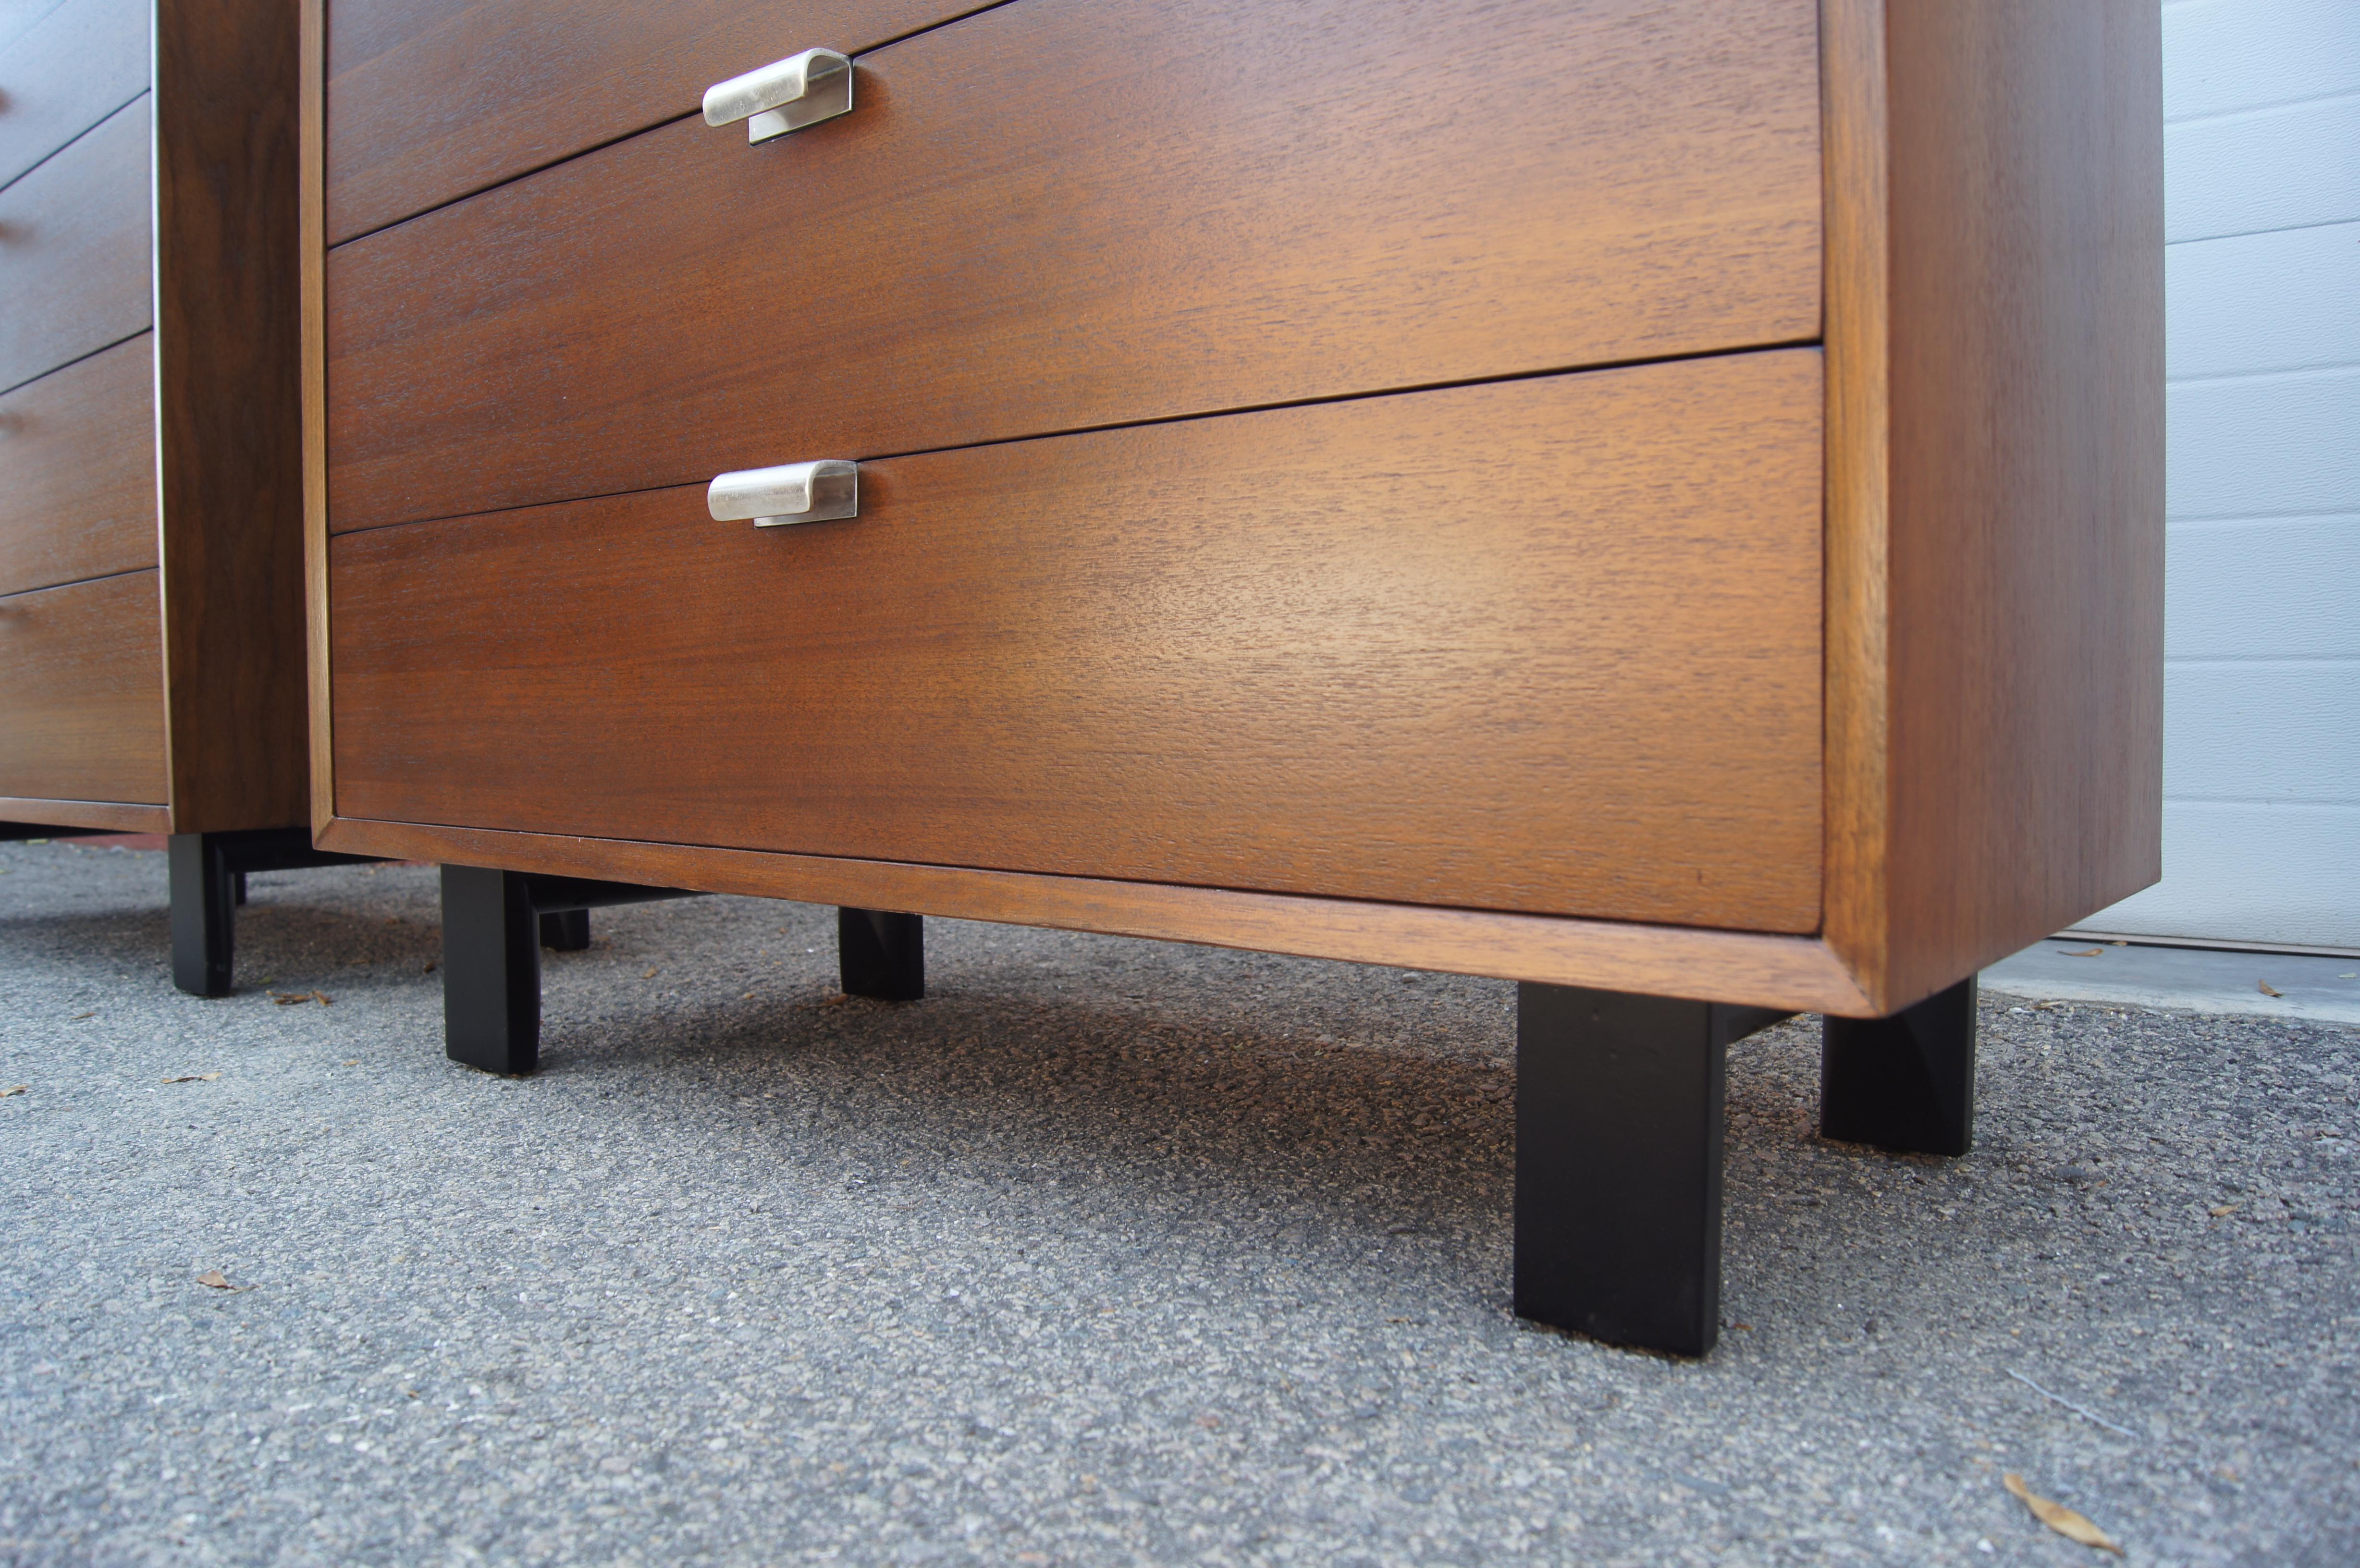 Pair of Walnut Dressers, Model 4620, by George Nelson for Herman Miller In Good Condition For Sale In Dorchester, MA